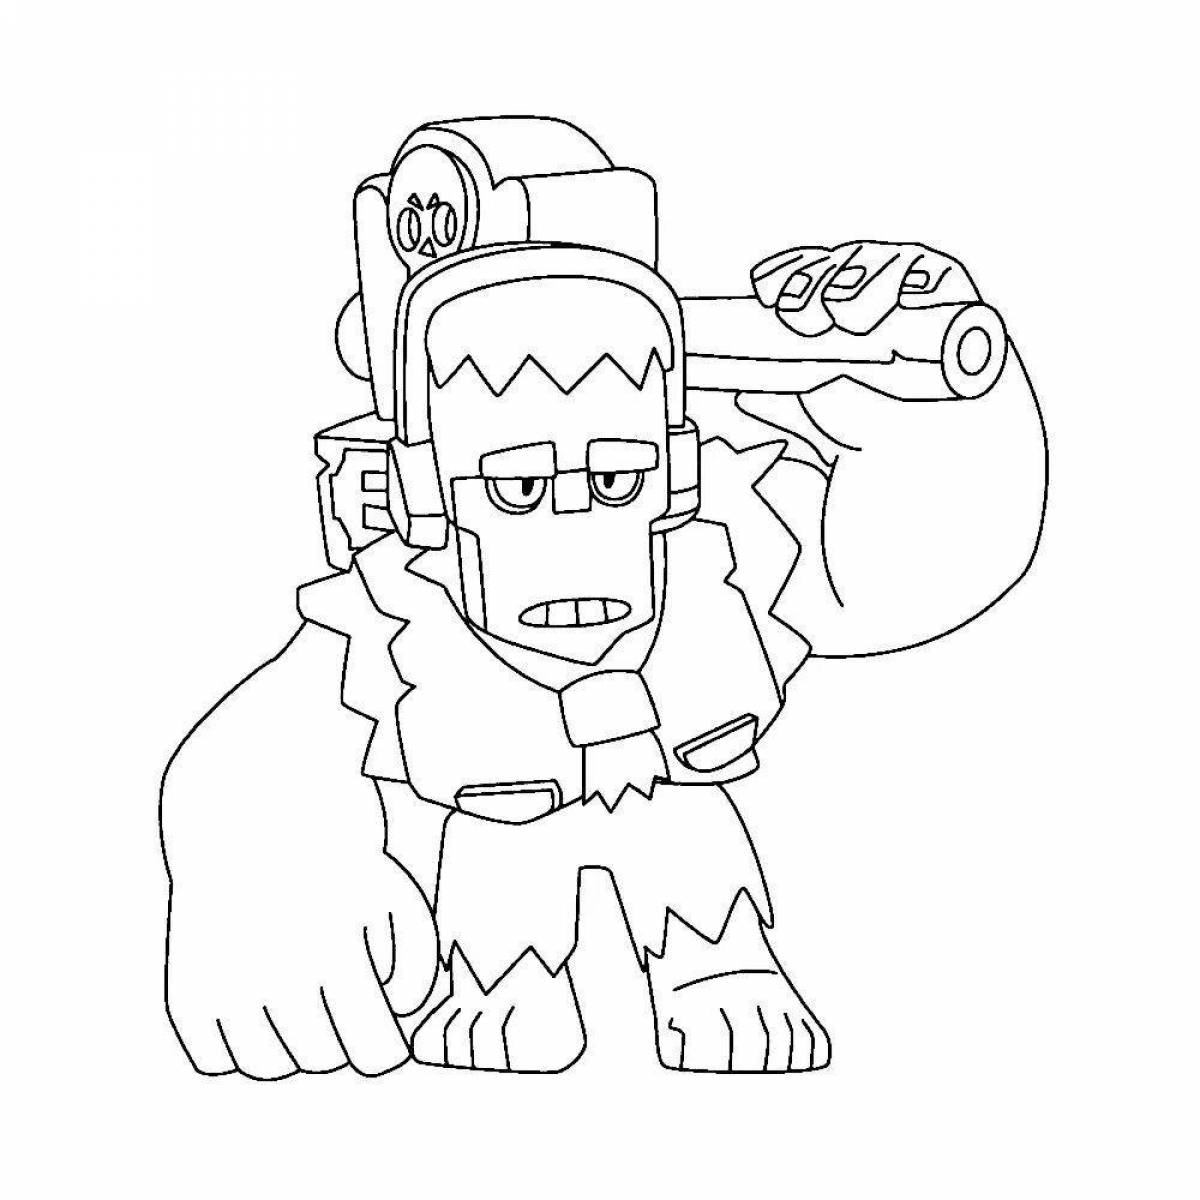 Decorated coloring book thunder from brawl stars